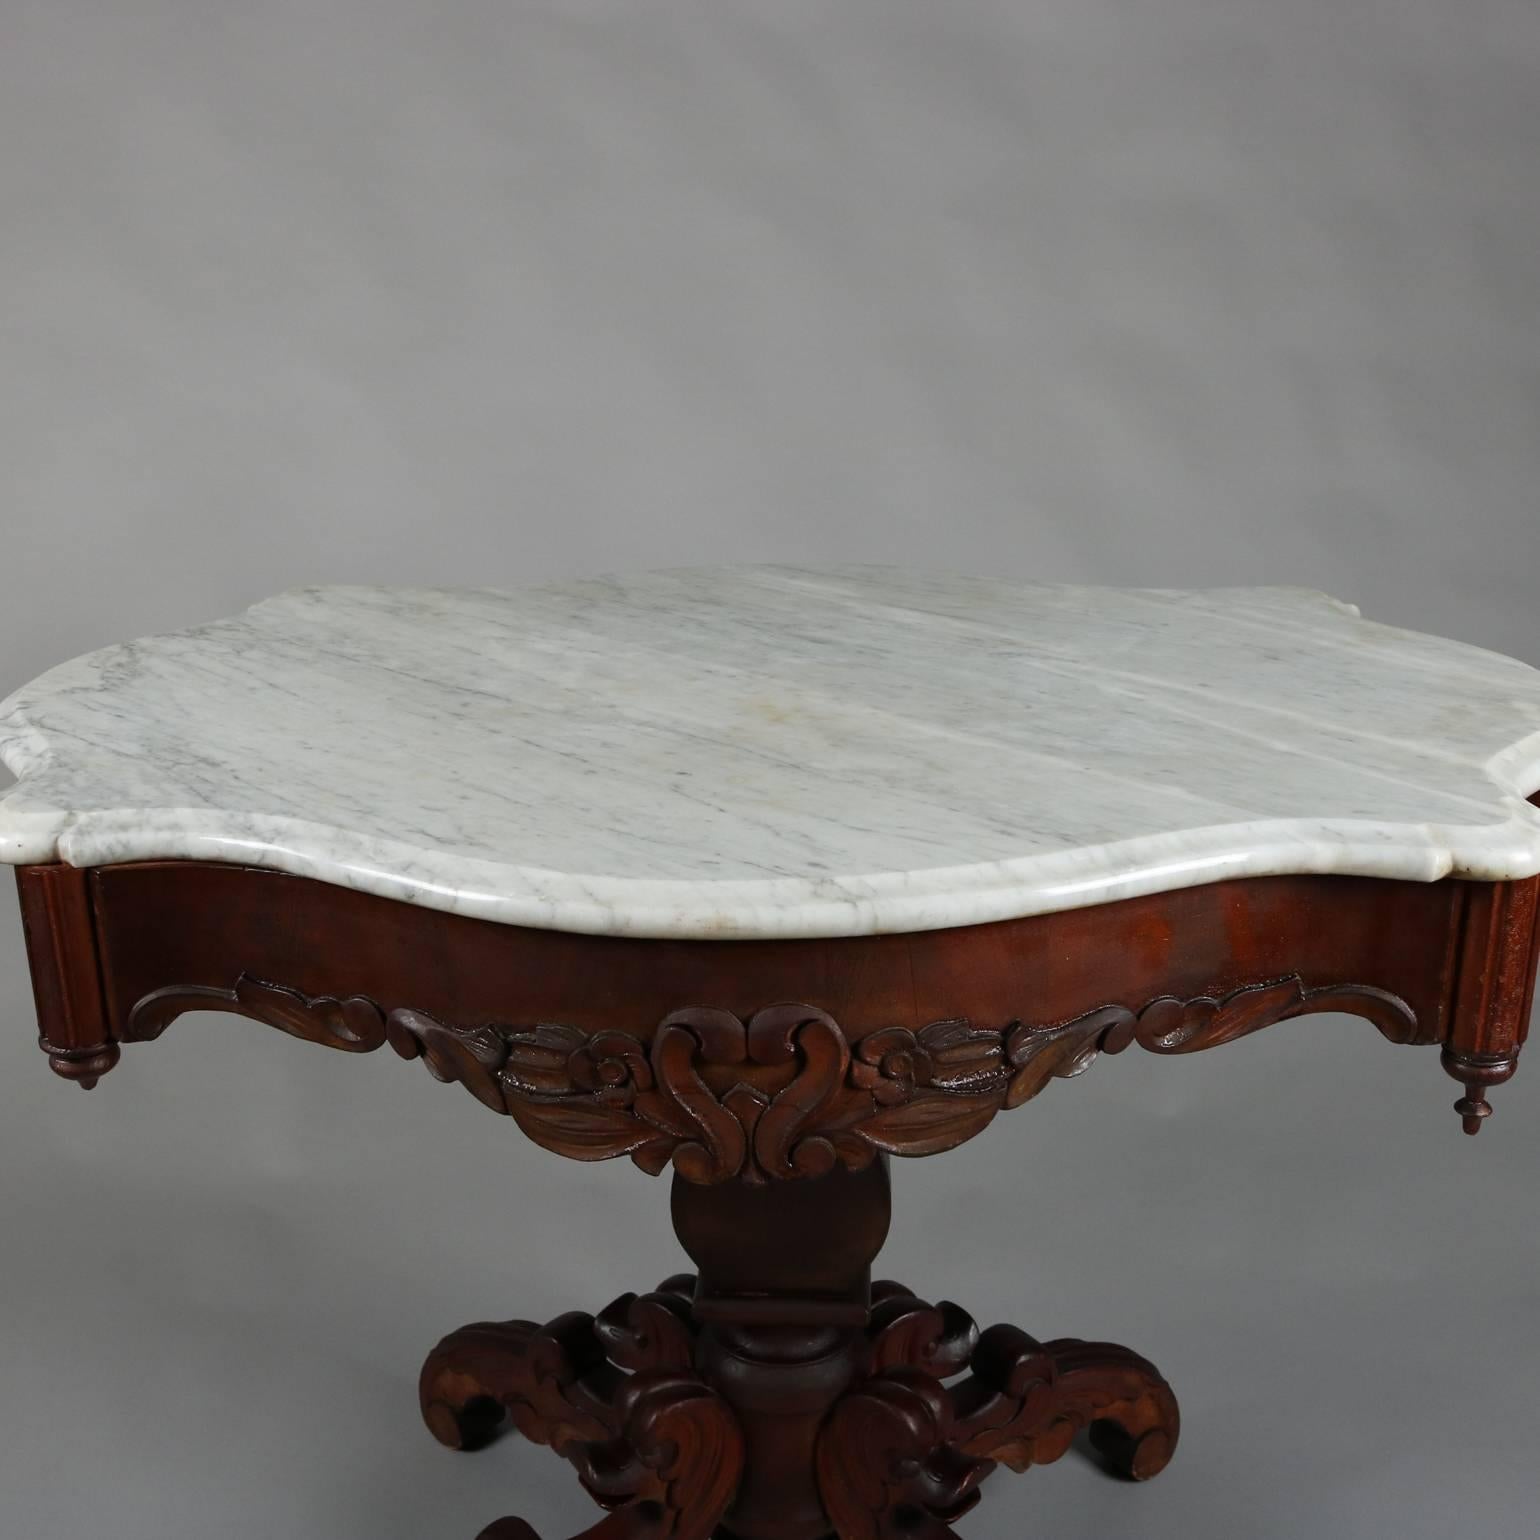 European Antique Carved Mahogany & Marble Turtle Top Table with Acanthus & Dolphin